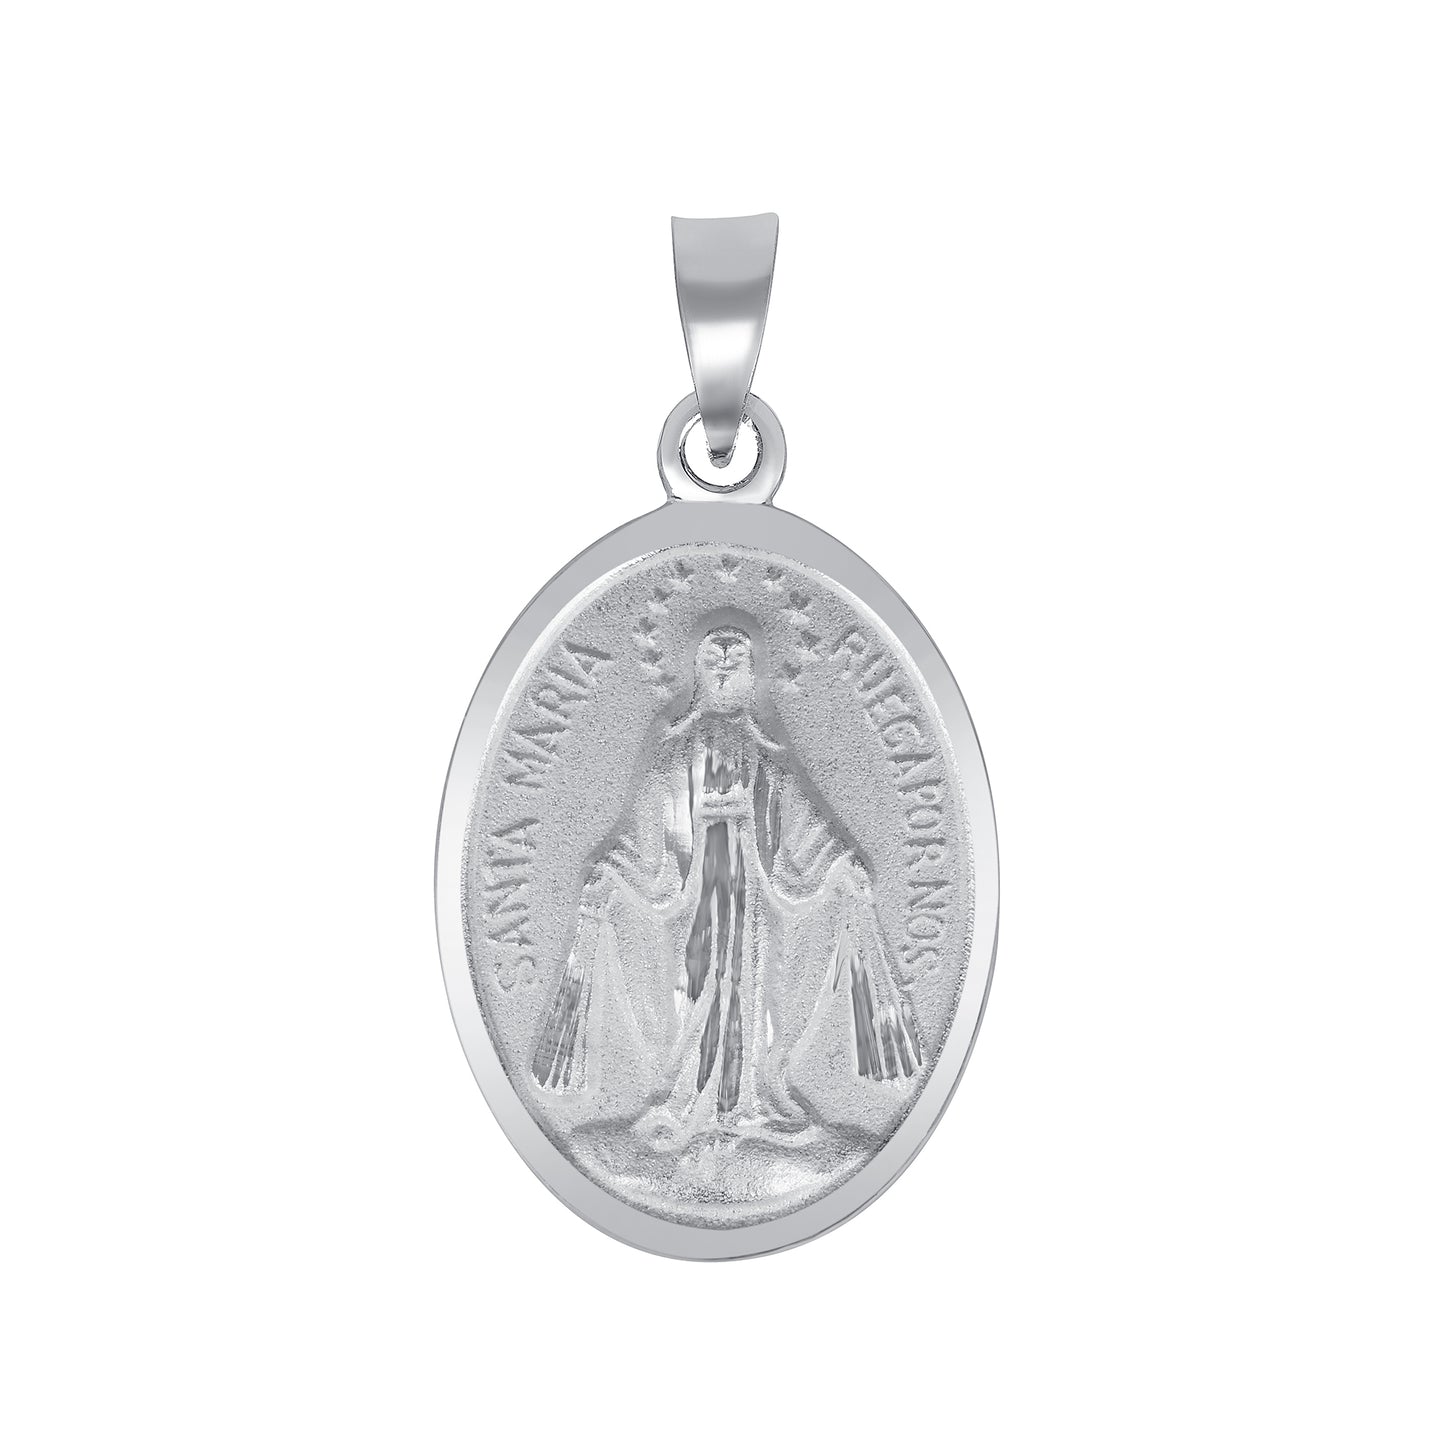 Silver 925 Virgin Mary Small Two-Sided Oval Pendant. MEDA66-S